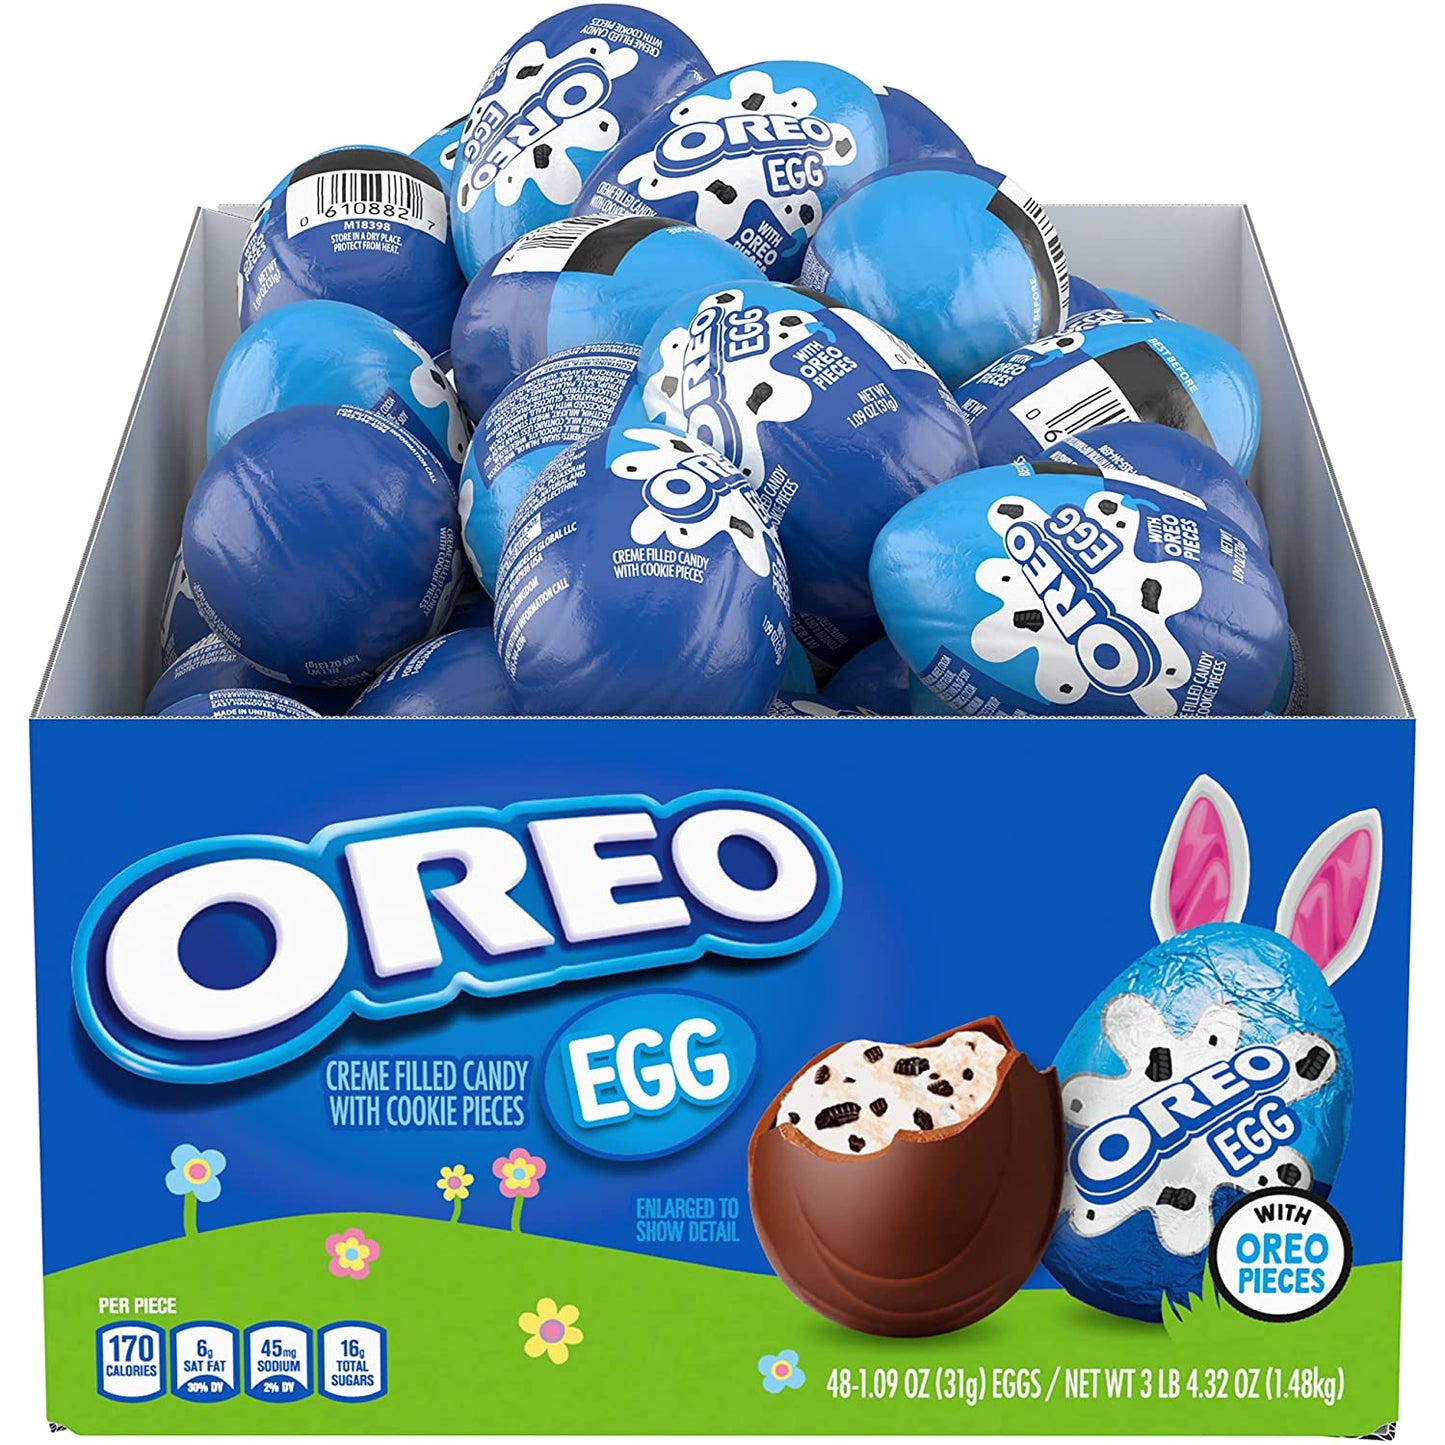 OREO Creme Filled Easter Chocolate Candy Egg, Easter Candy, 48 Chocolate Easter Eggs